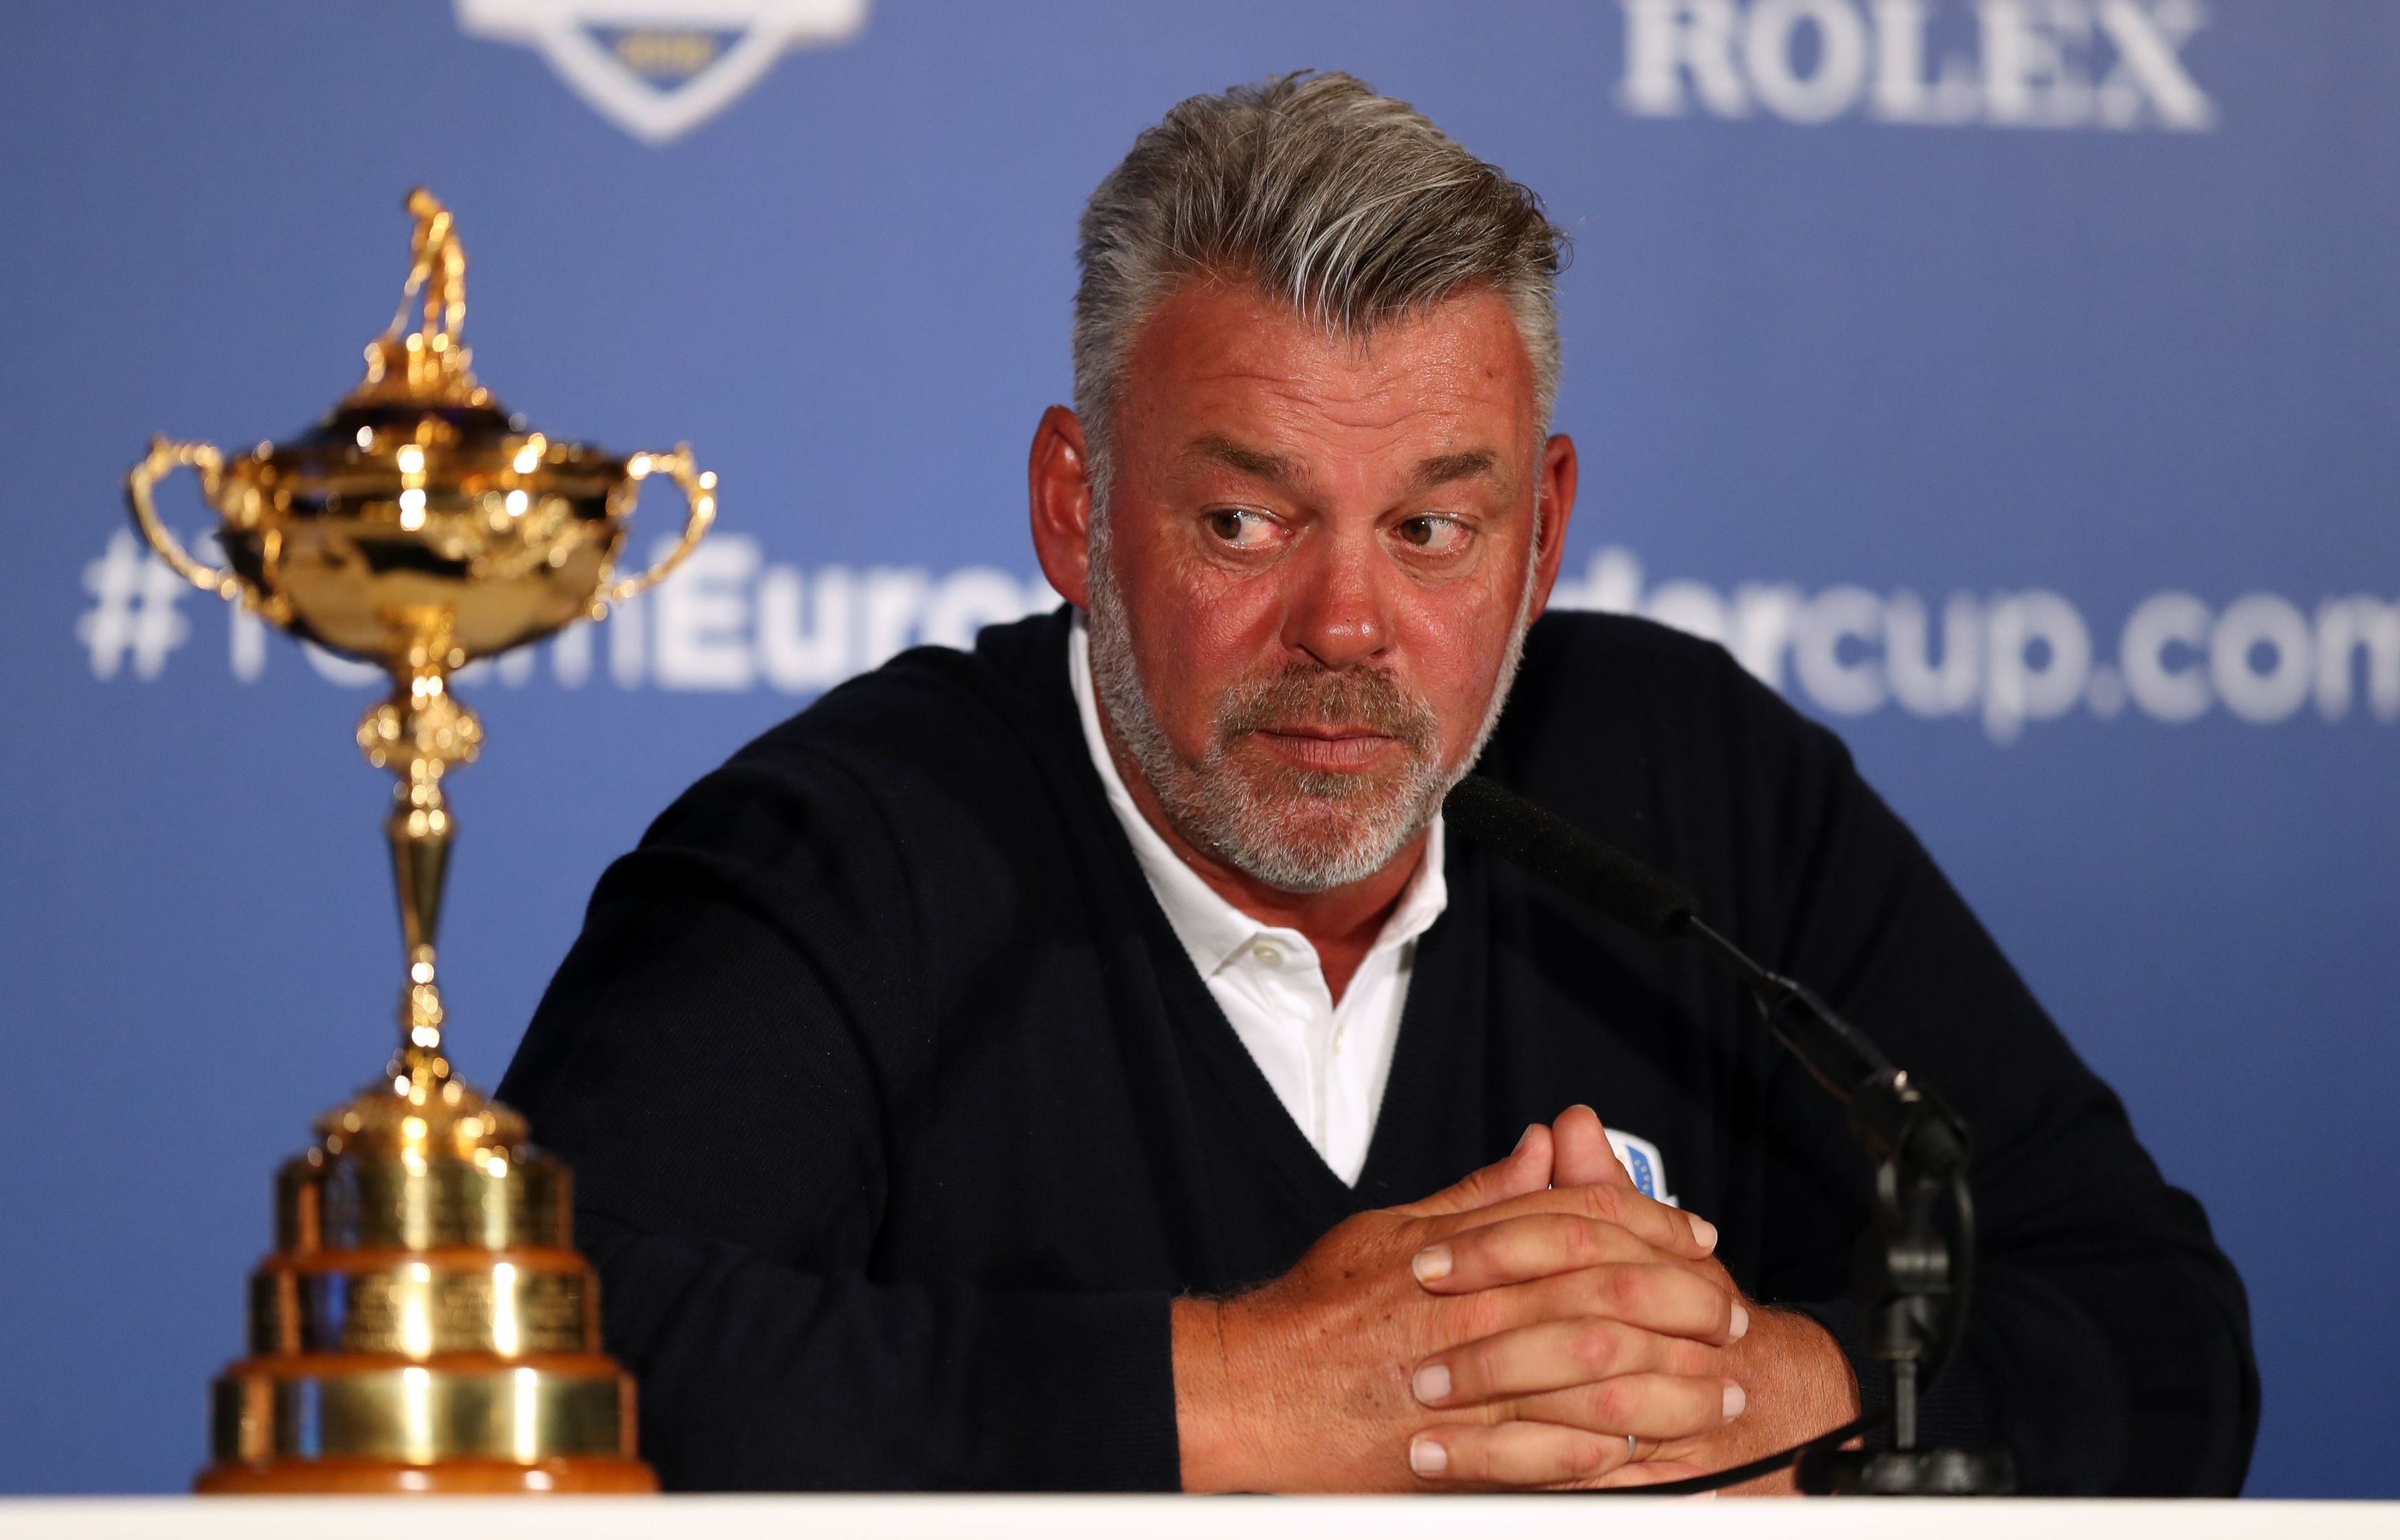 European Ryder Cup captain Darren Clarke during his wilcard announcement at Wentworth.